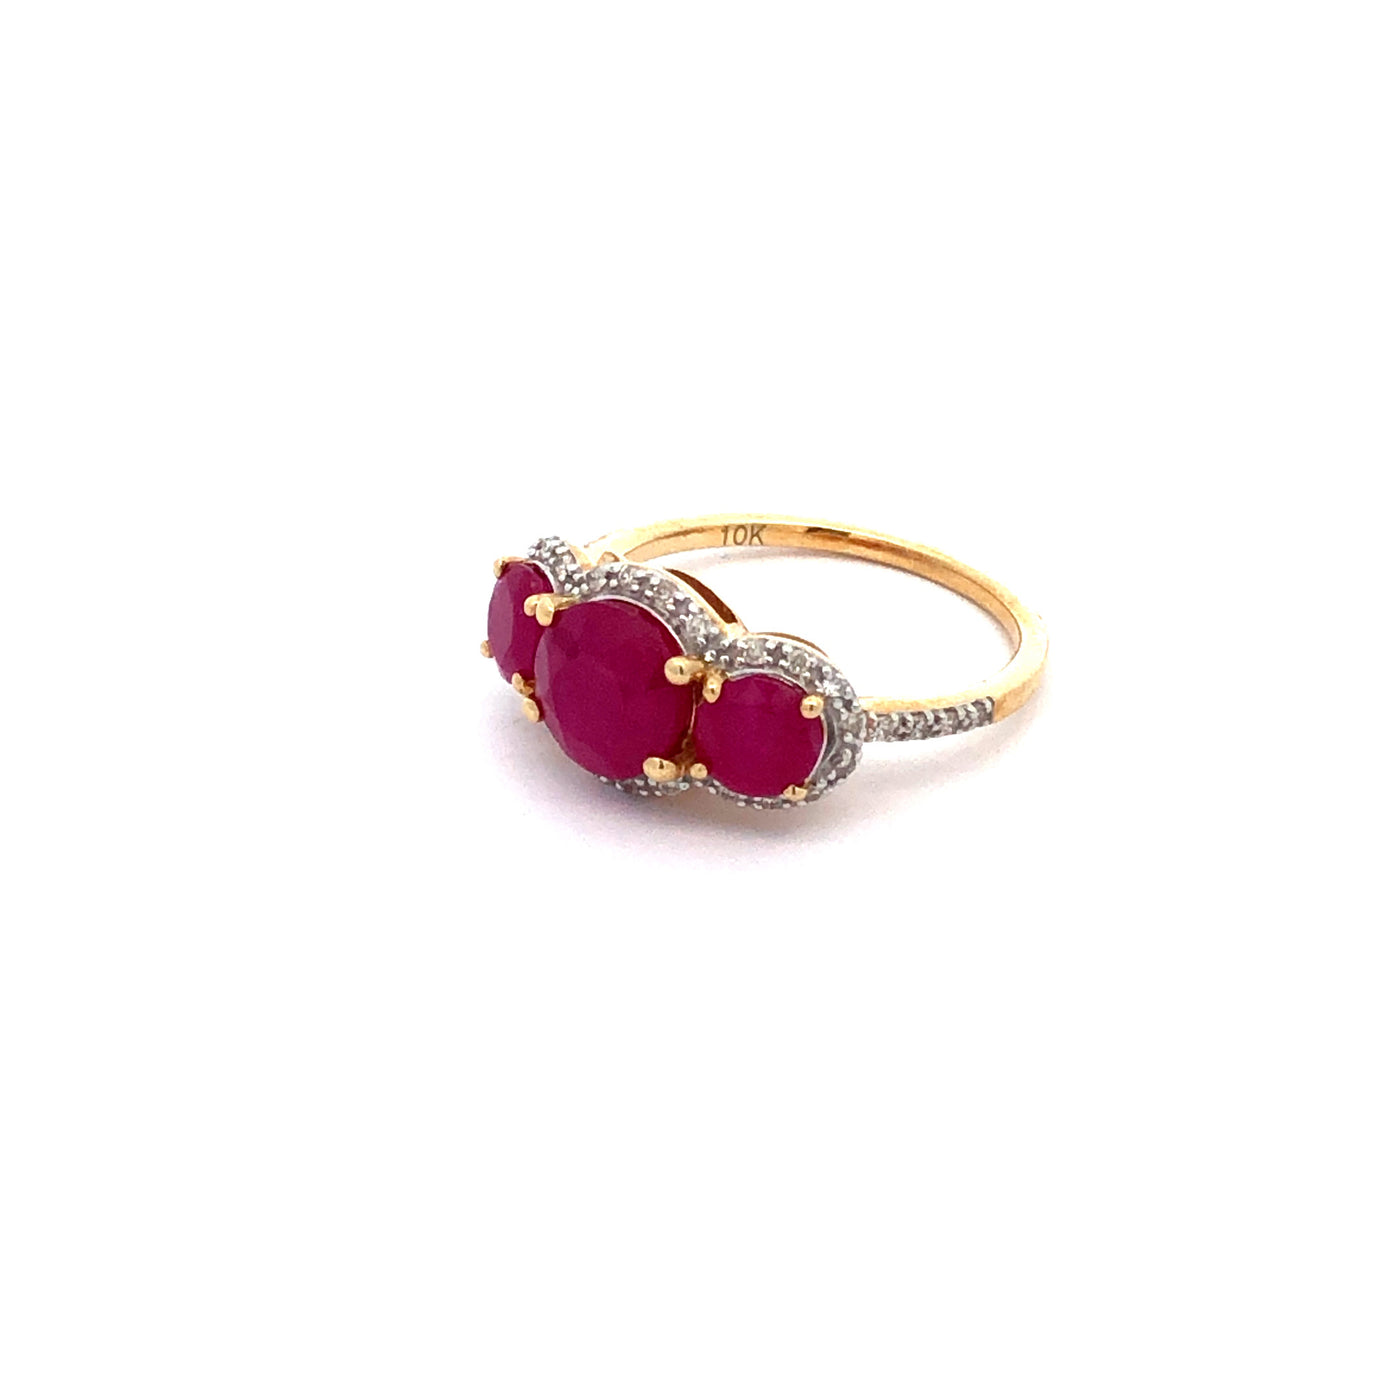 10Ct Yellow Gold Trilogy Ruby And Diamond Halo Ring.